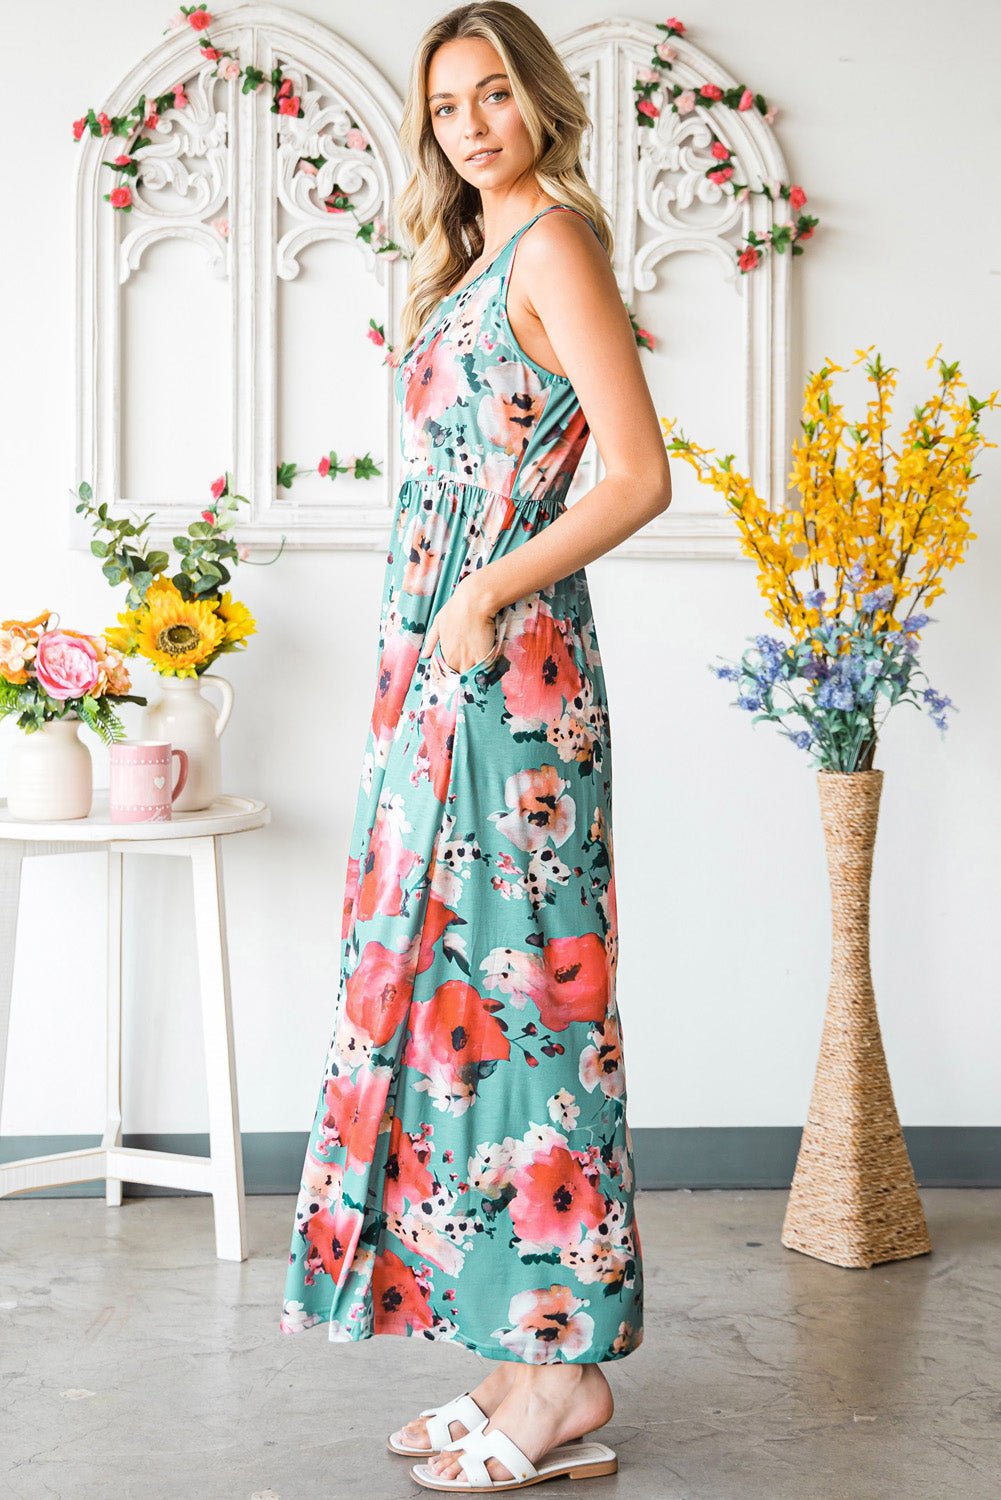 Blossoming Beauty Floral Maxi Dress - Embrace Love's Whimsy and Romance - Soft, Stretchy, and Breathable for All-Day Elegance - Guy Christopher